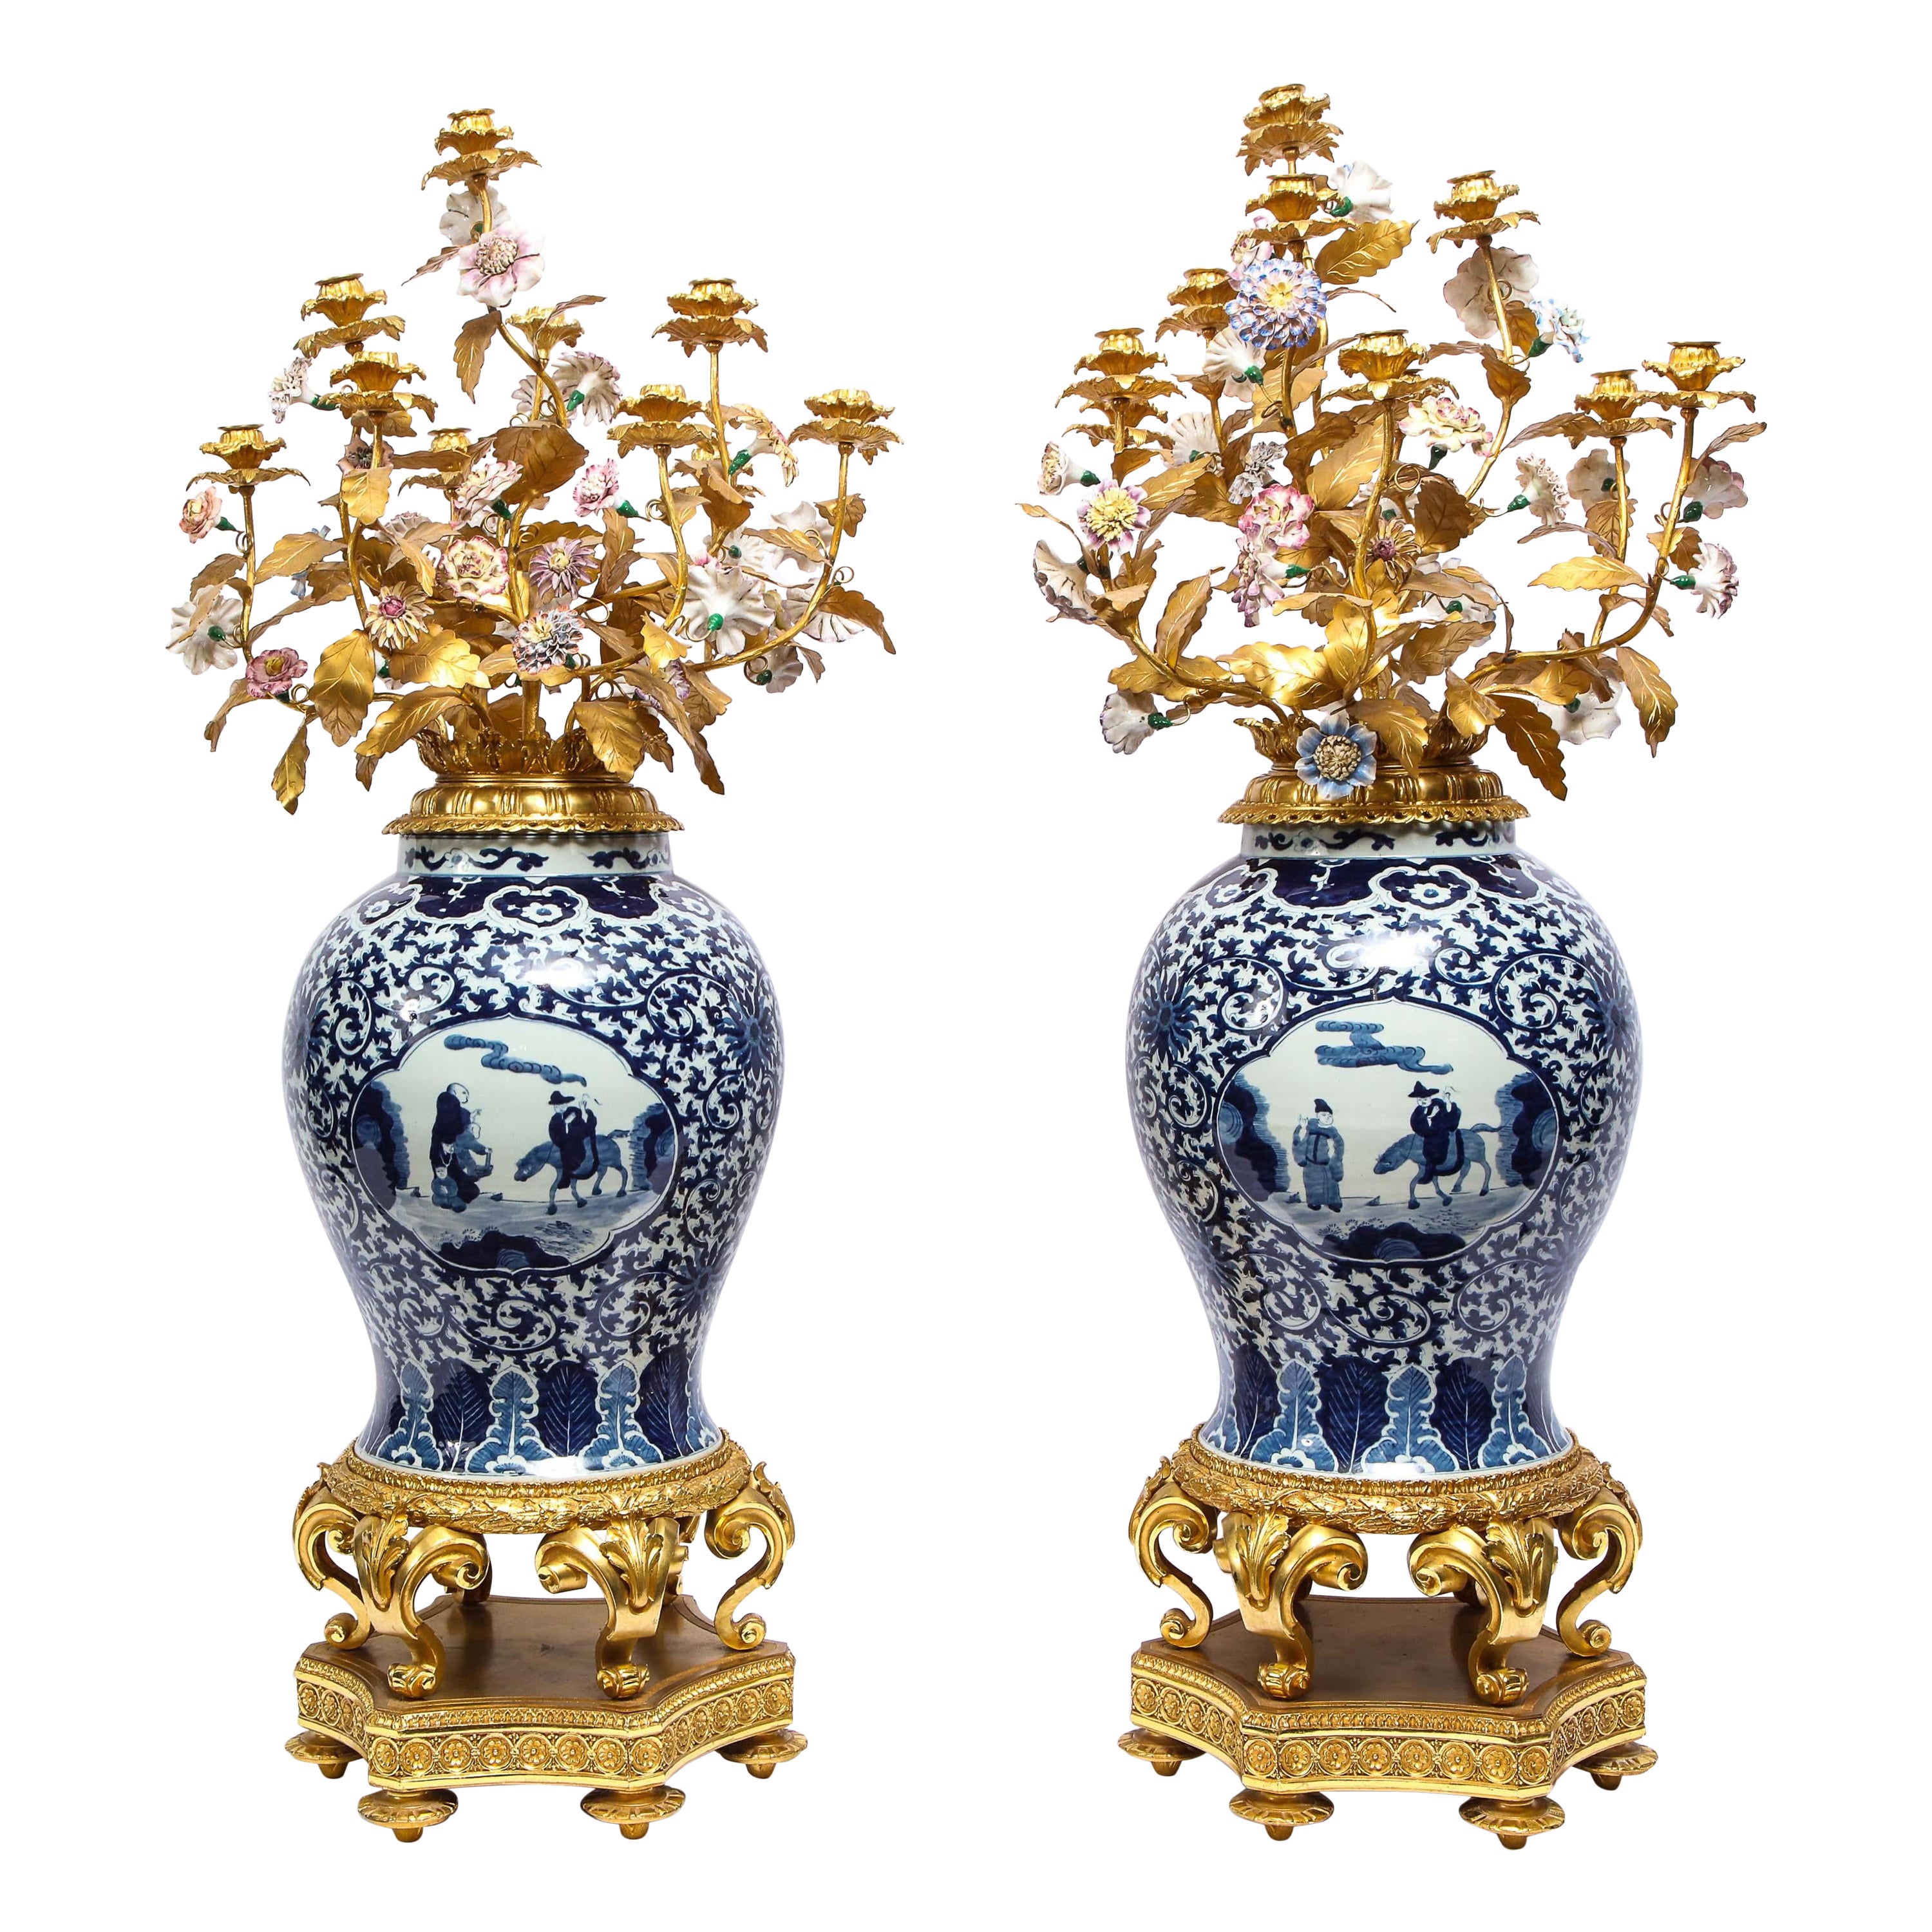 Pair of French Ormolu Mounted Chinese Blue & White Porcelain Ten Arm Candelabras